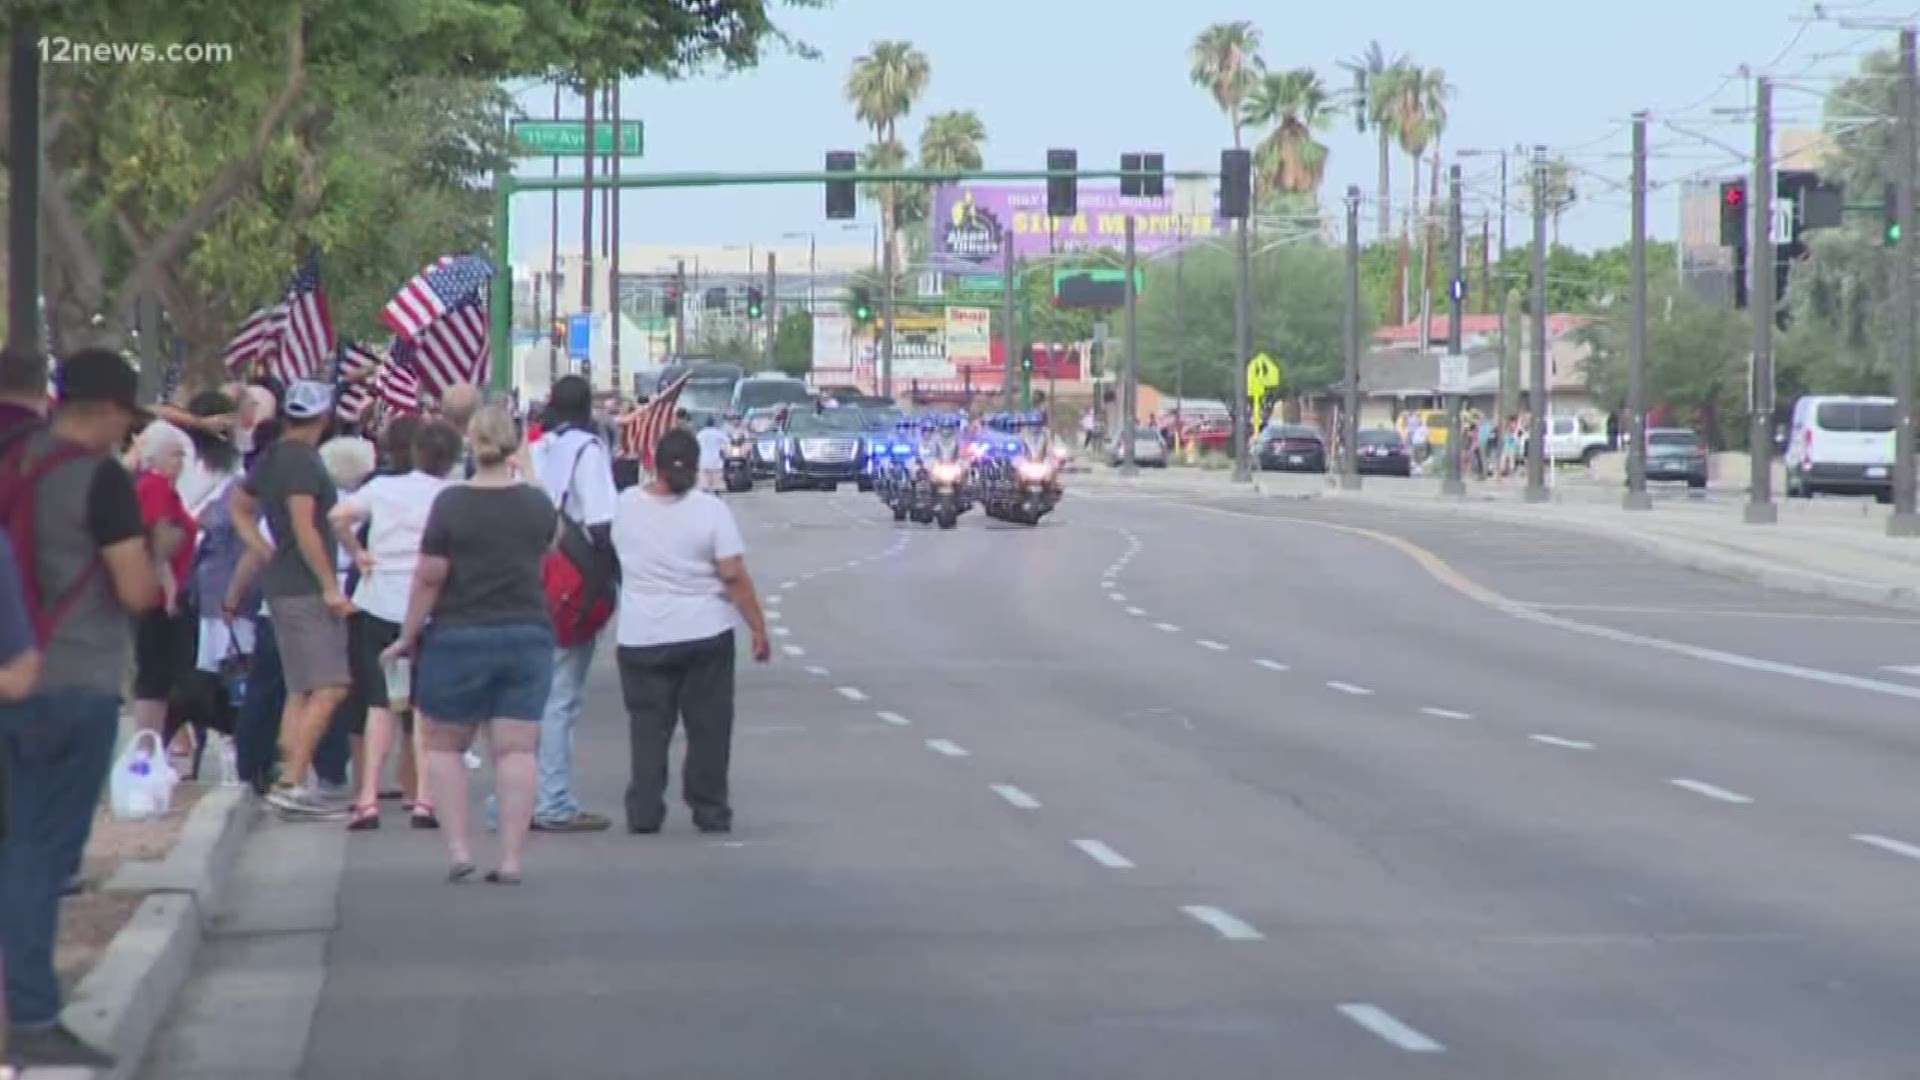 As his body made it's way through the streets of Phoenix, heading to North Phoenix Baptist Church for memorial services, citizens came out with flags and flowers to pay tribute to John McCain.